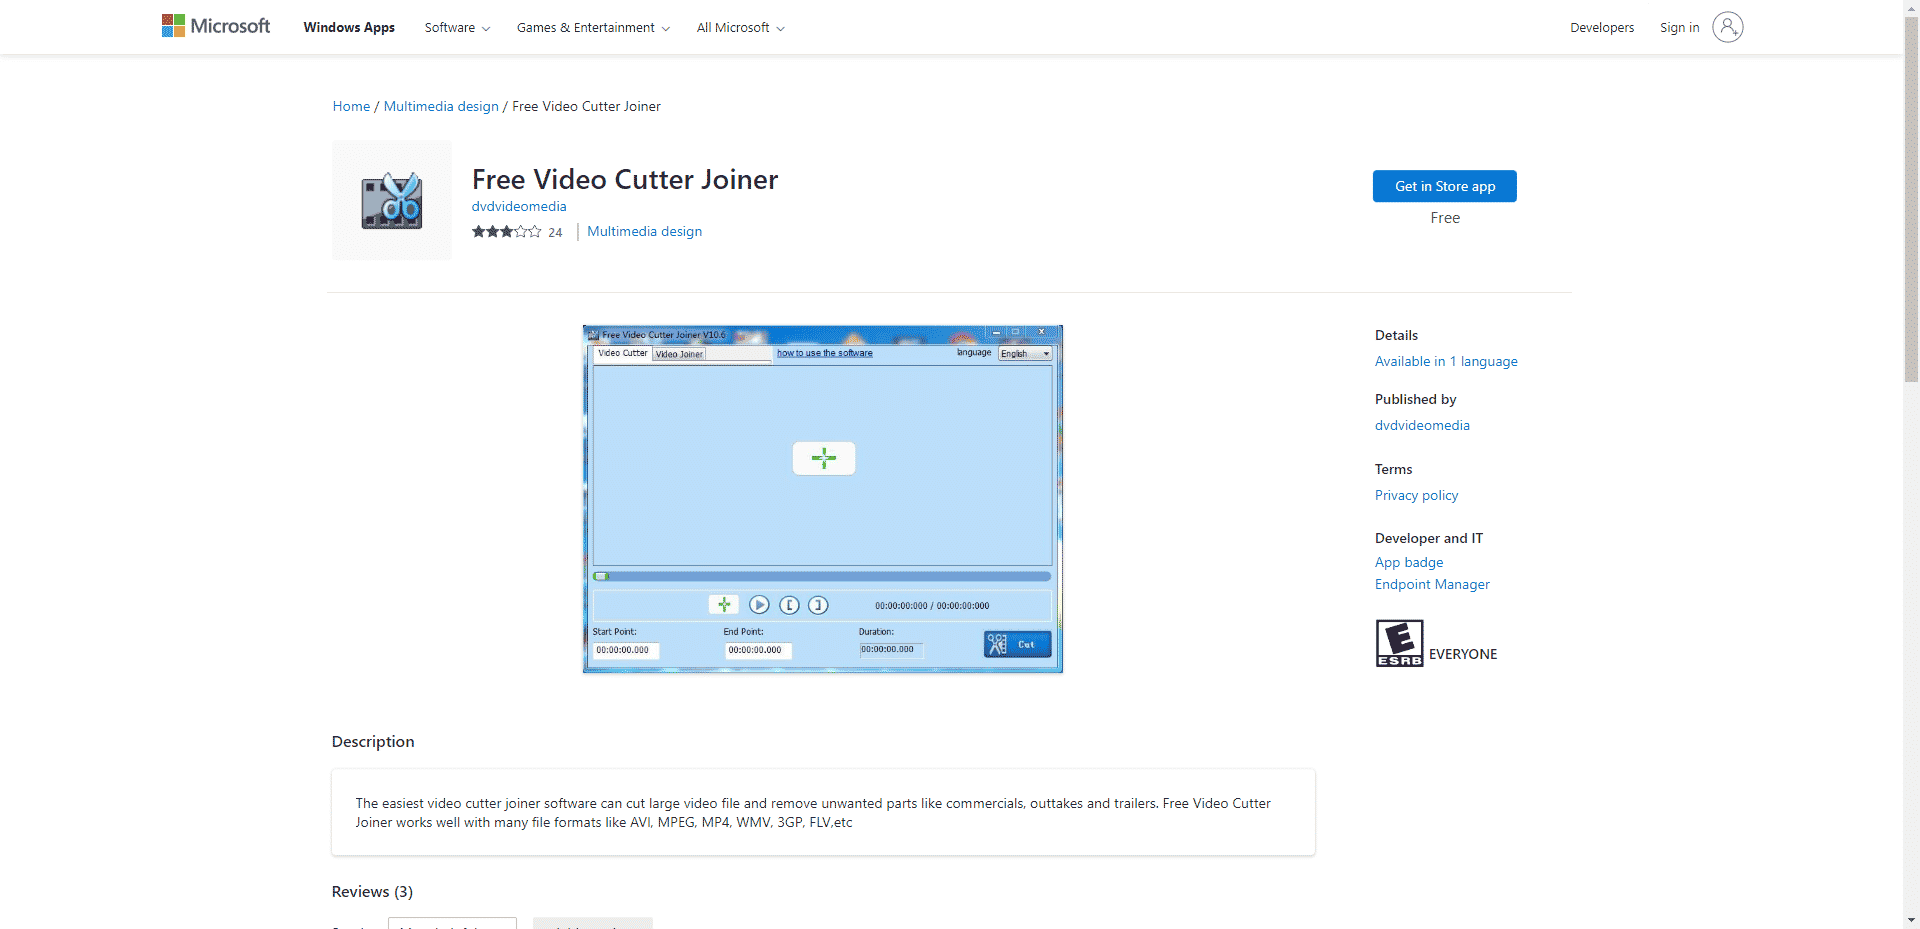 Free Video Cutter Joiner Windows Store webpage